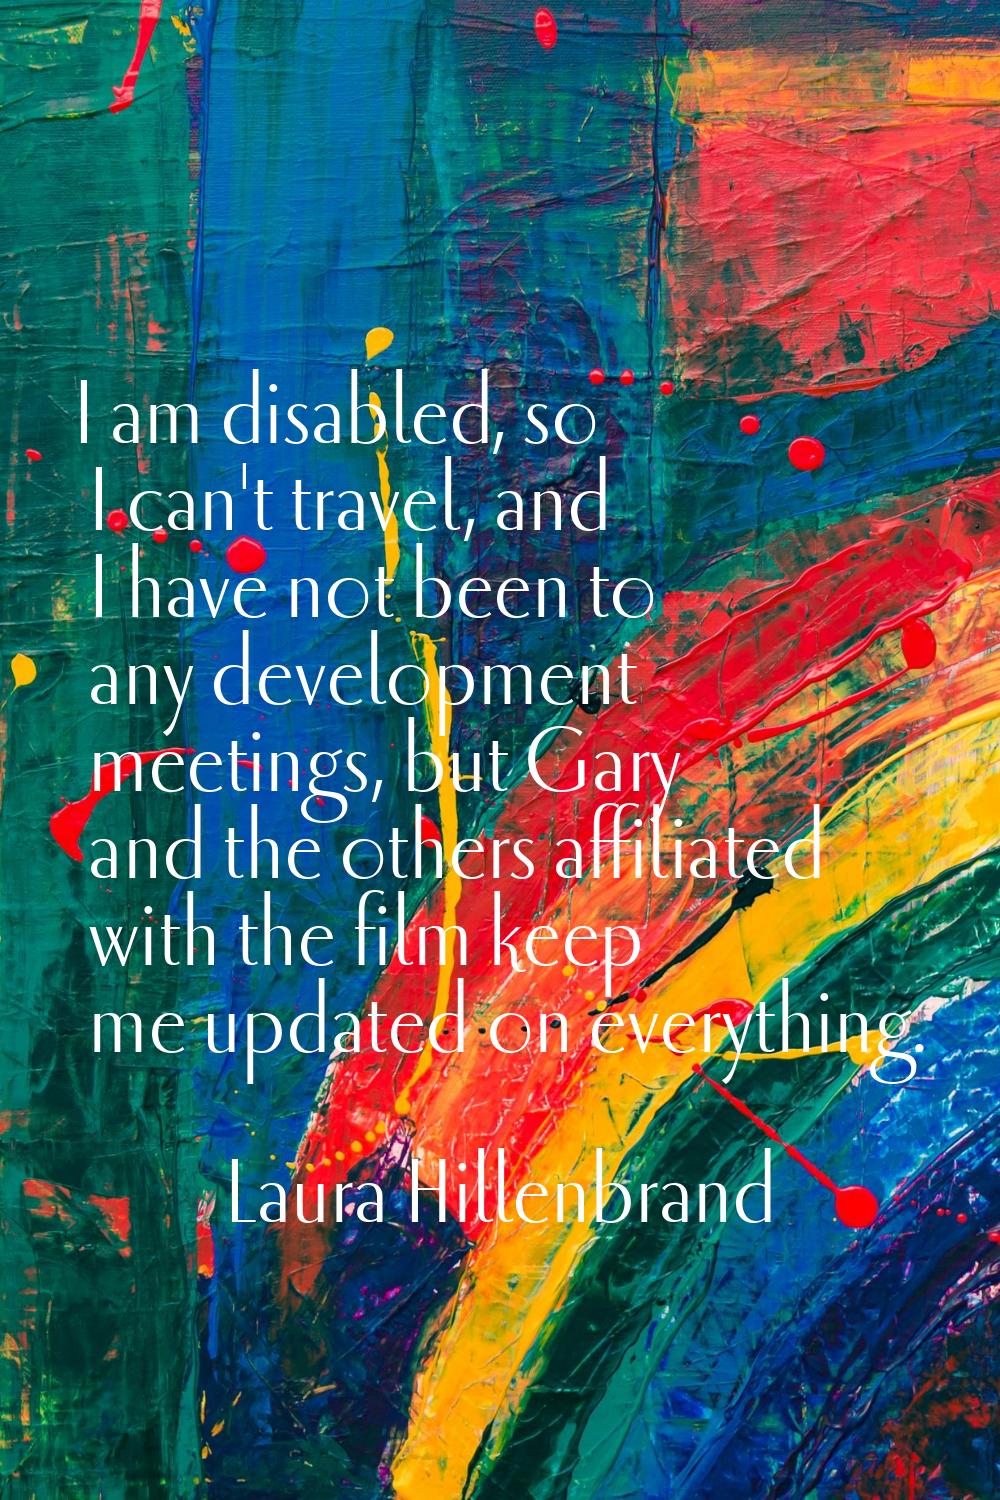 I am disabled, so I can't travel, and I have not been to any development meetings, but Gary and the